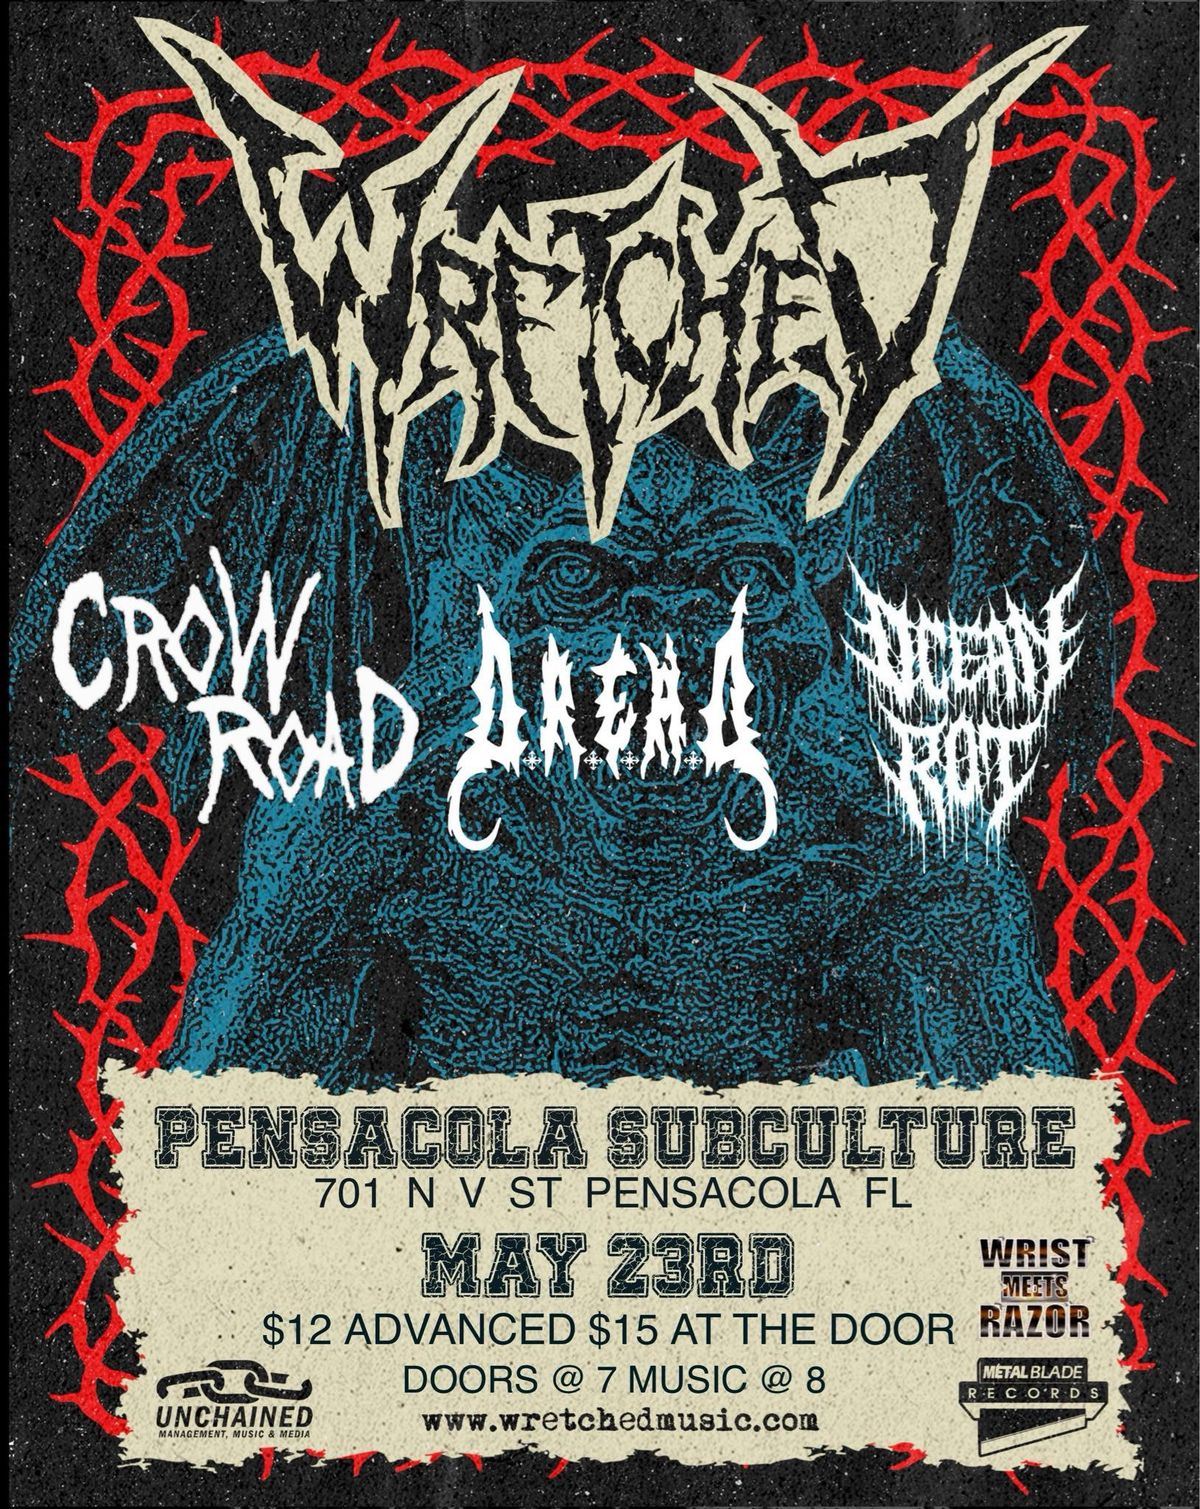 Wretched, Crow Road, D.R.E.A.D, and Ocean Rot at Subculture May 23rd 